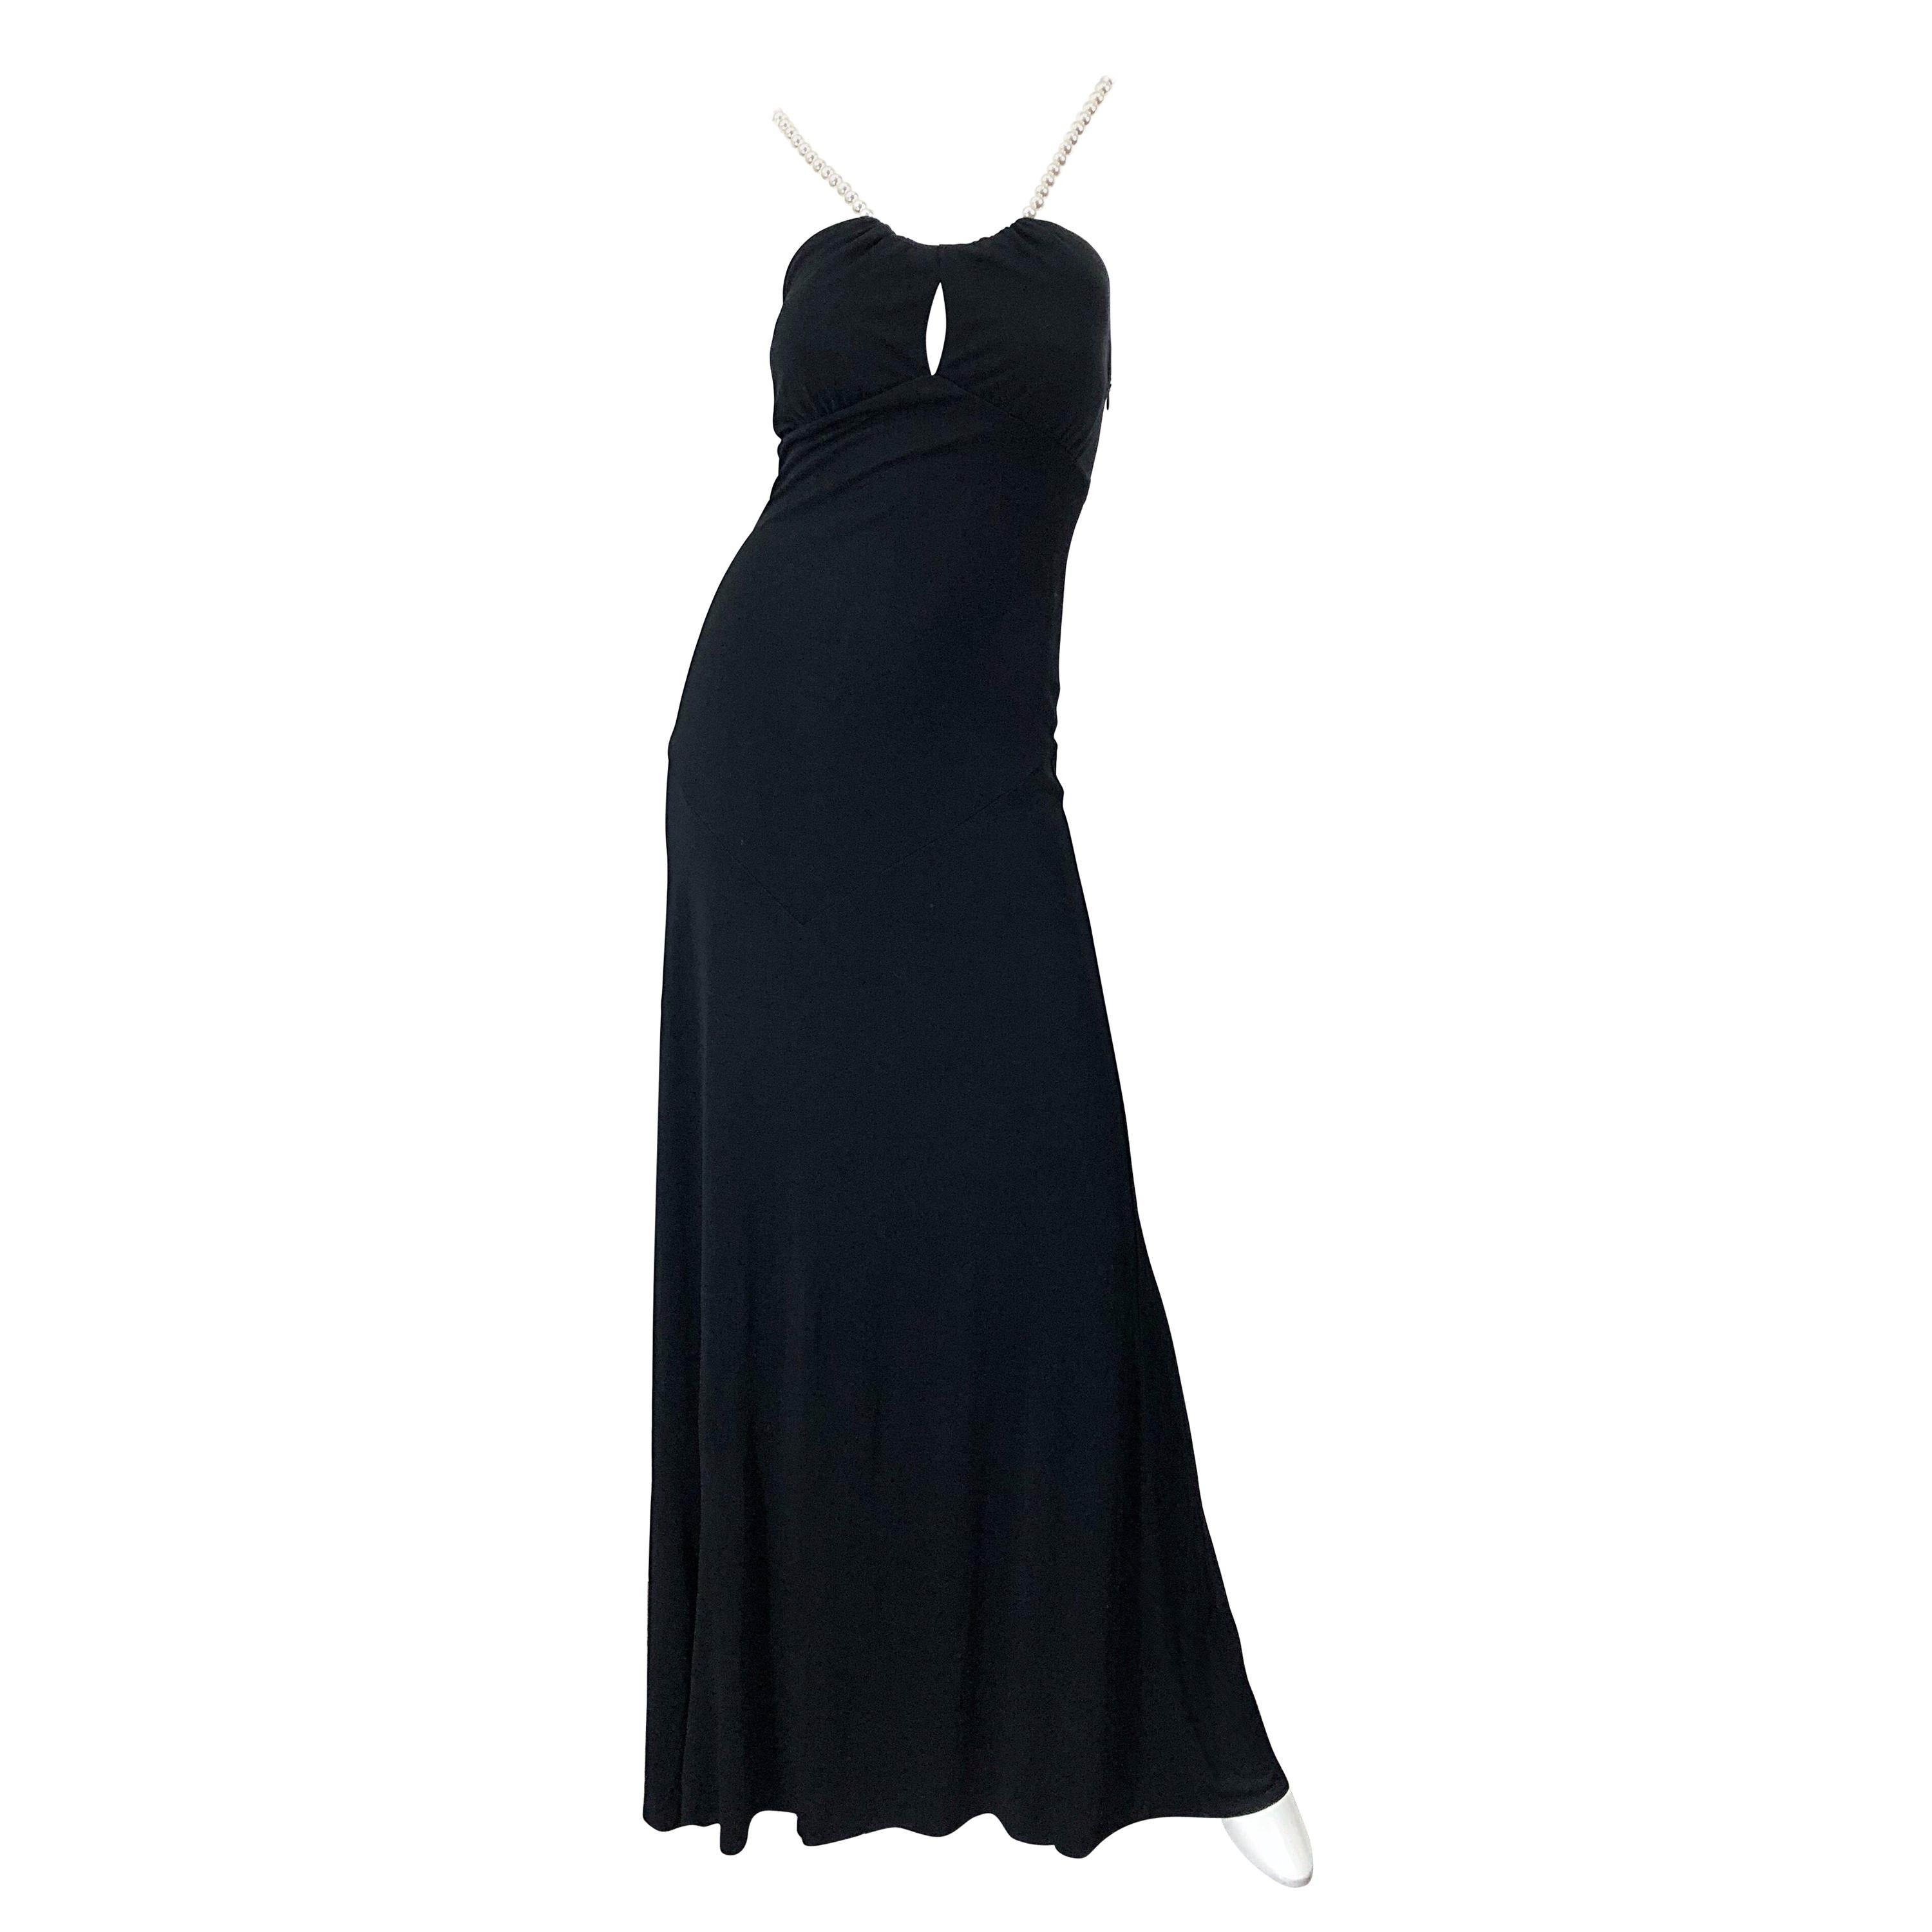 Sexy 2000s MICHAEL KORS COLLECTION black and white pearl strap Grecian style evening gown! Features white pearls as straps that sit slightly off the shoulder, with two rows of pearls that drape along the back. Fitted soft rayon jersey stretches to